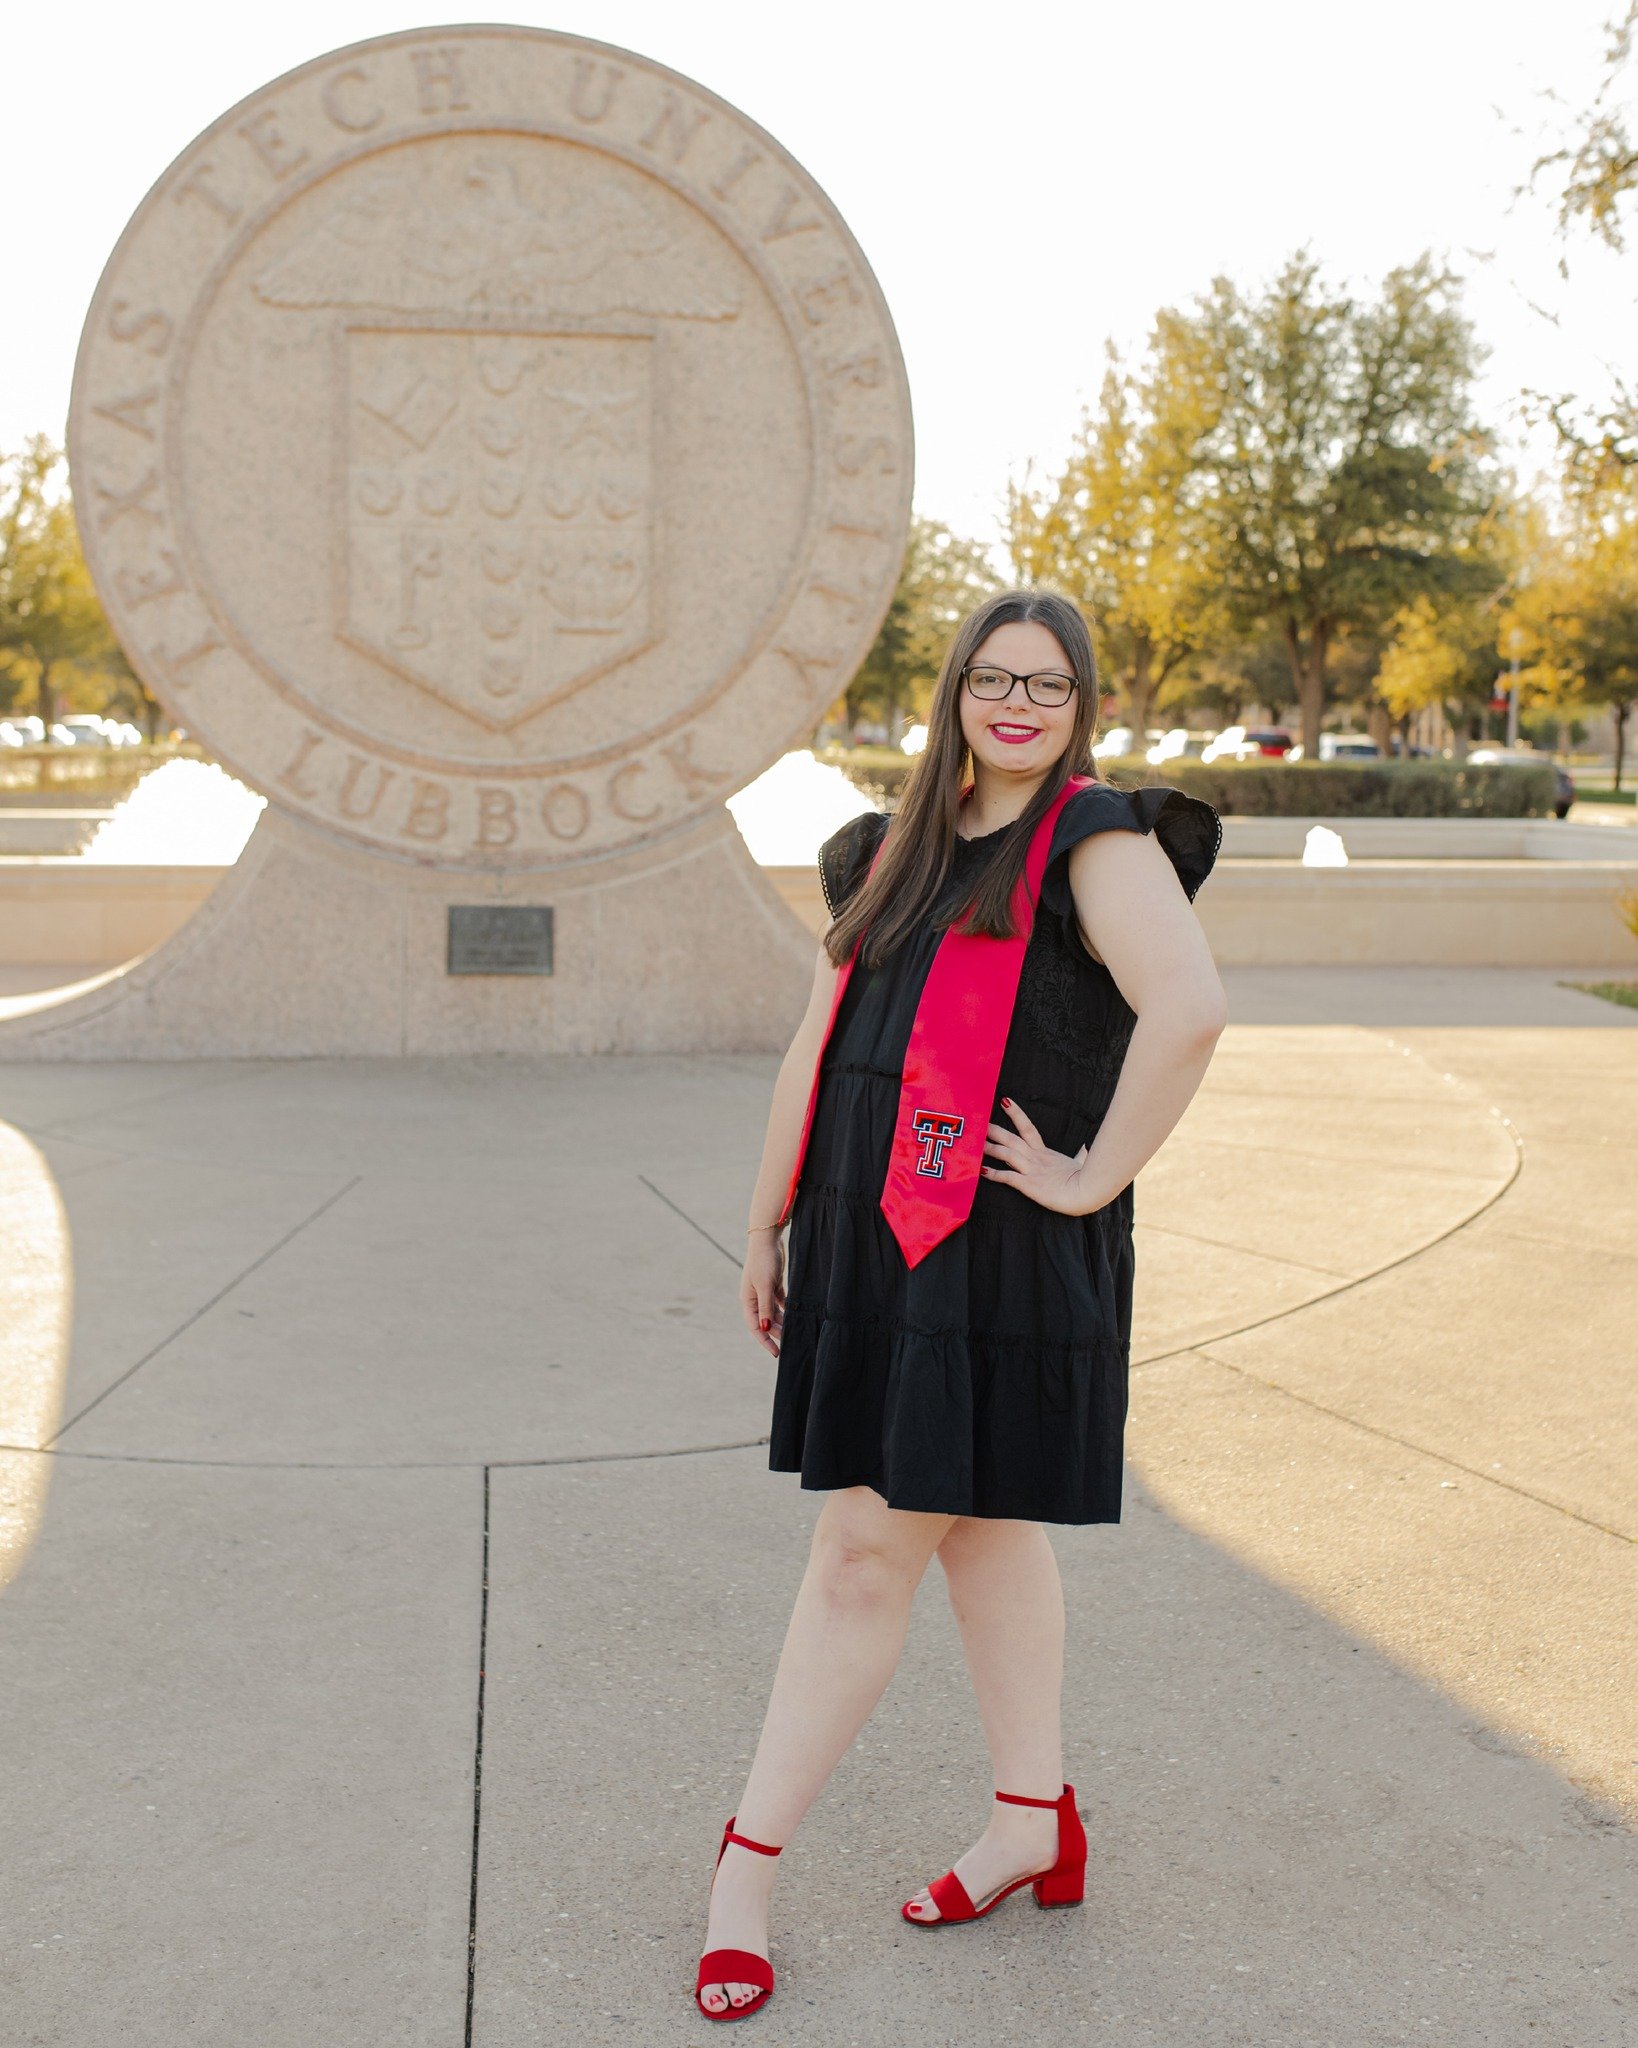 she's working late, cause she's a teacher!! 📖 
We love our teachers around here, and Margaret is going to be an AWESOME one!
Congrats girl!
.
.
.
.
#ttu24 #TTU25 #texastechgrad
#lubbockgradphotographer #lubbockseniorphotographer #texasteacher #ttute